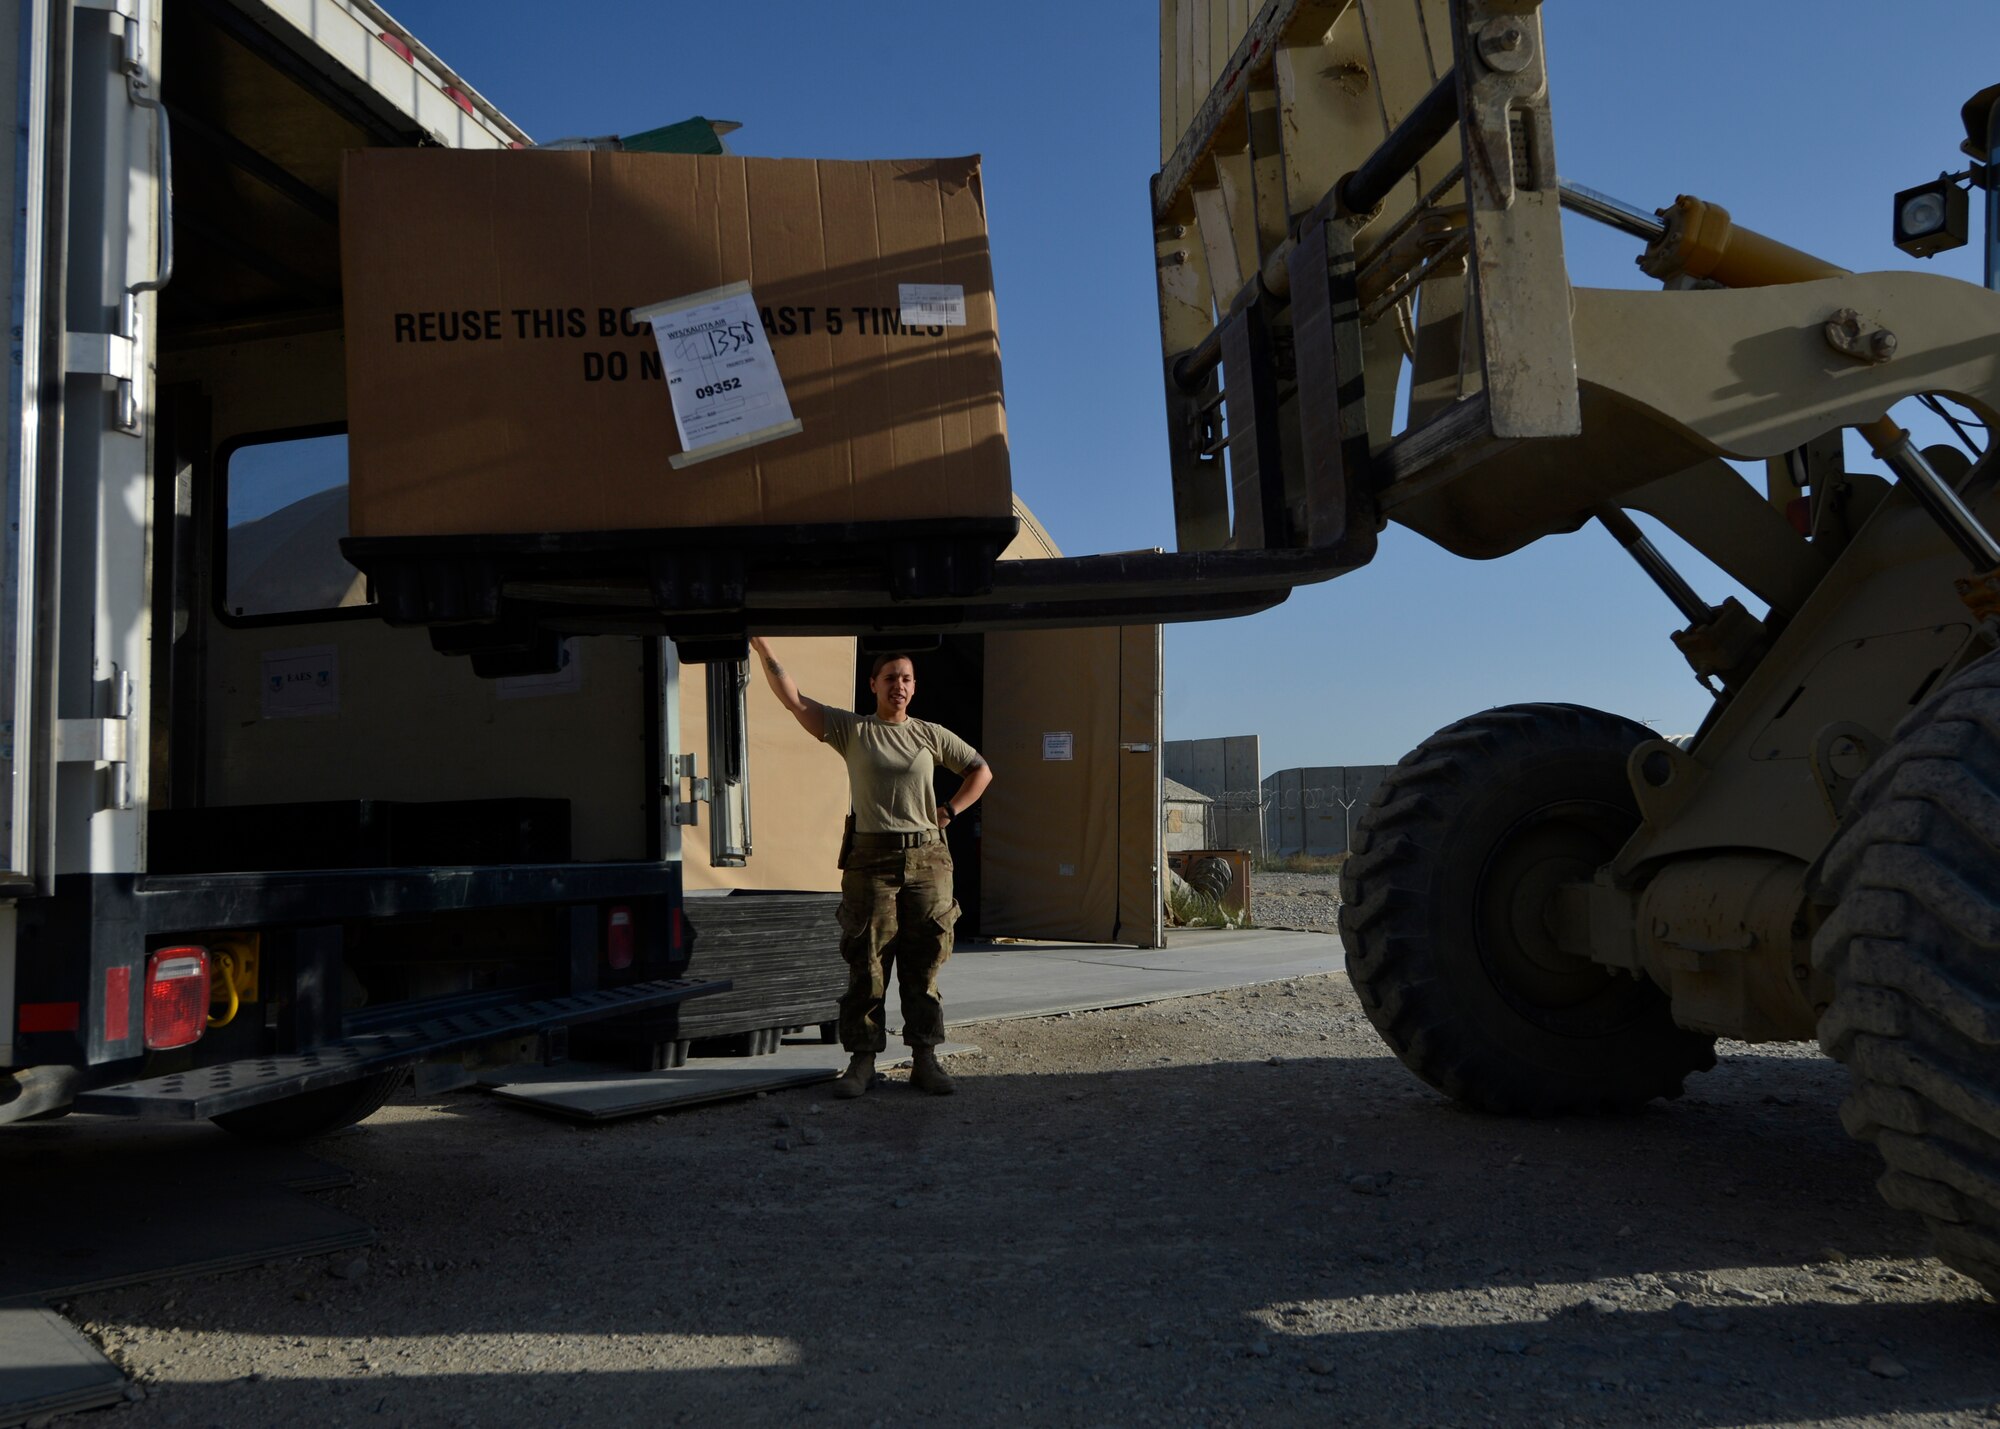 U.S. Air Force Senior Airman Victoria Hill, 455th Expeditionary Communications Squadron mail clerk, directs a forklift with a pallet of mail at Bagram Airfield, Afghanistan June 26, 2014.  Hill is responsible for delivering mail to all Airmen in the 455th Expeditionary Wing.  She is deployed from Whiteman Air Force Base, Mo. and a native of Blanchard, La. (U.S. Air Force photo by Staff Sgt. Evelyn Chavez/Released)